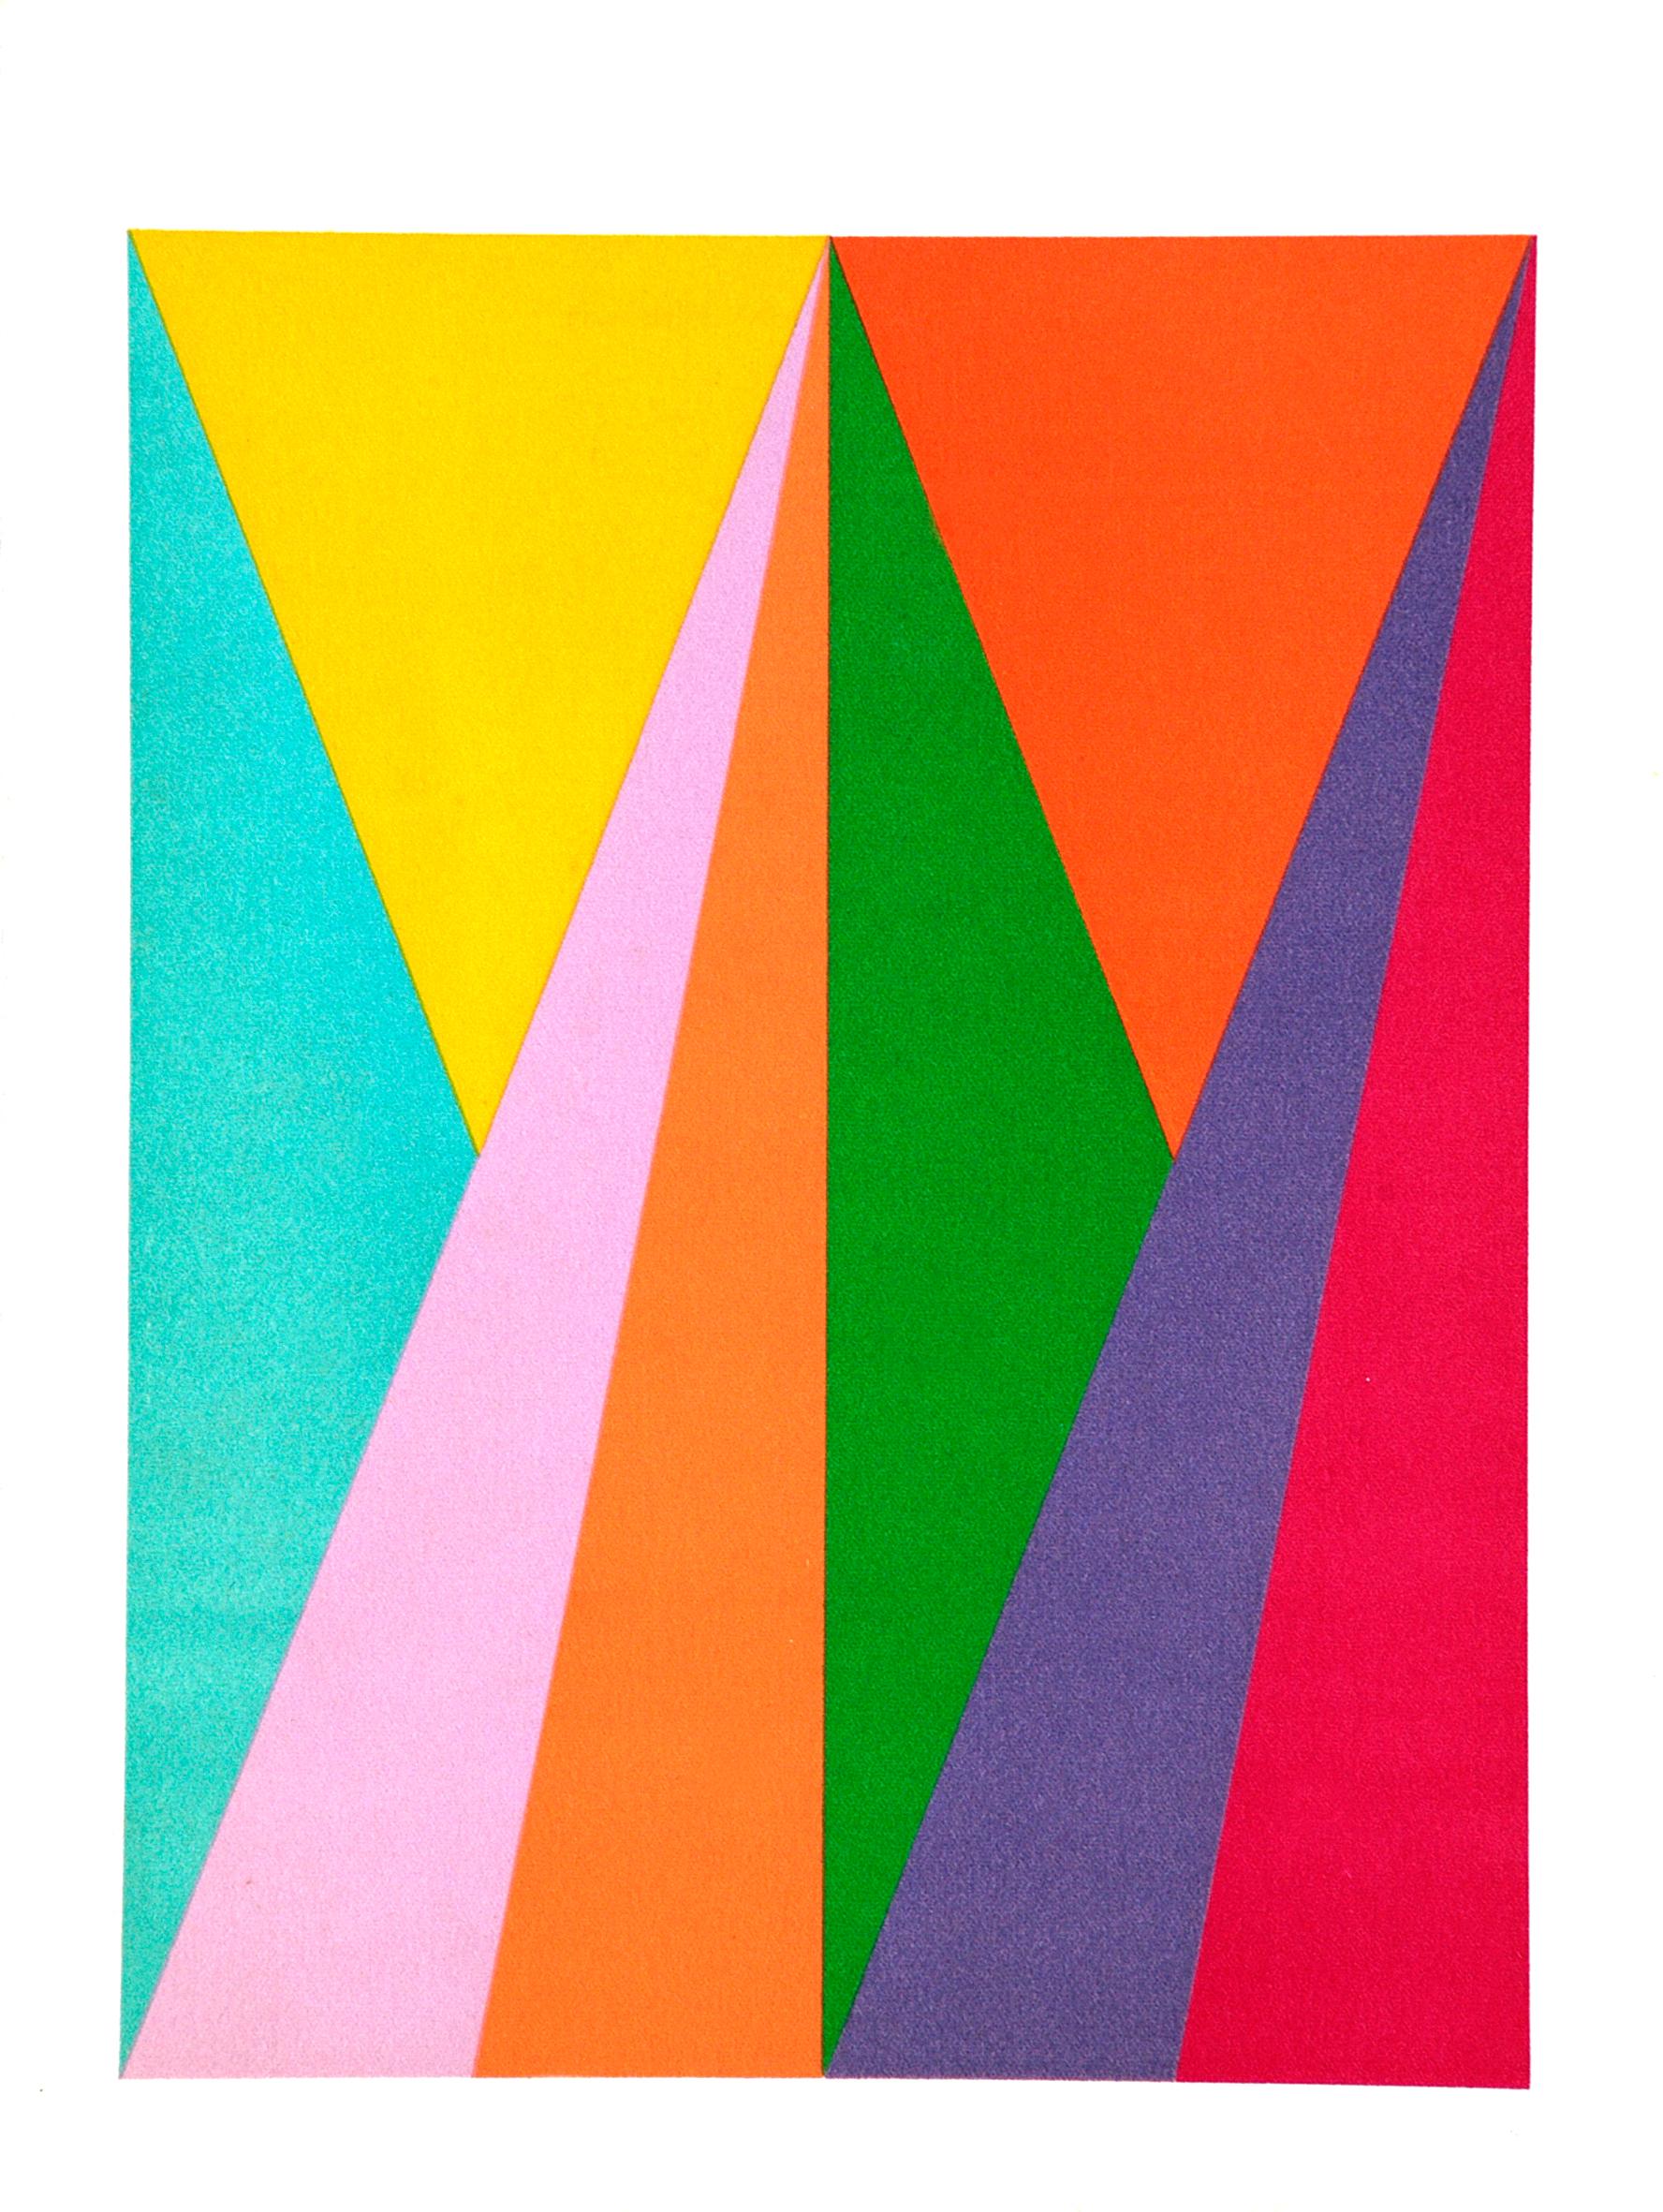 Geometry - Original Lithograph by Max Bill - 1975